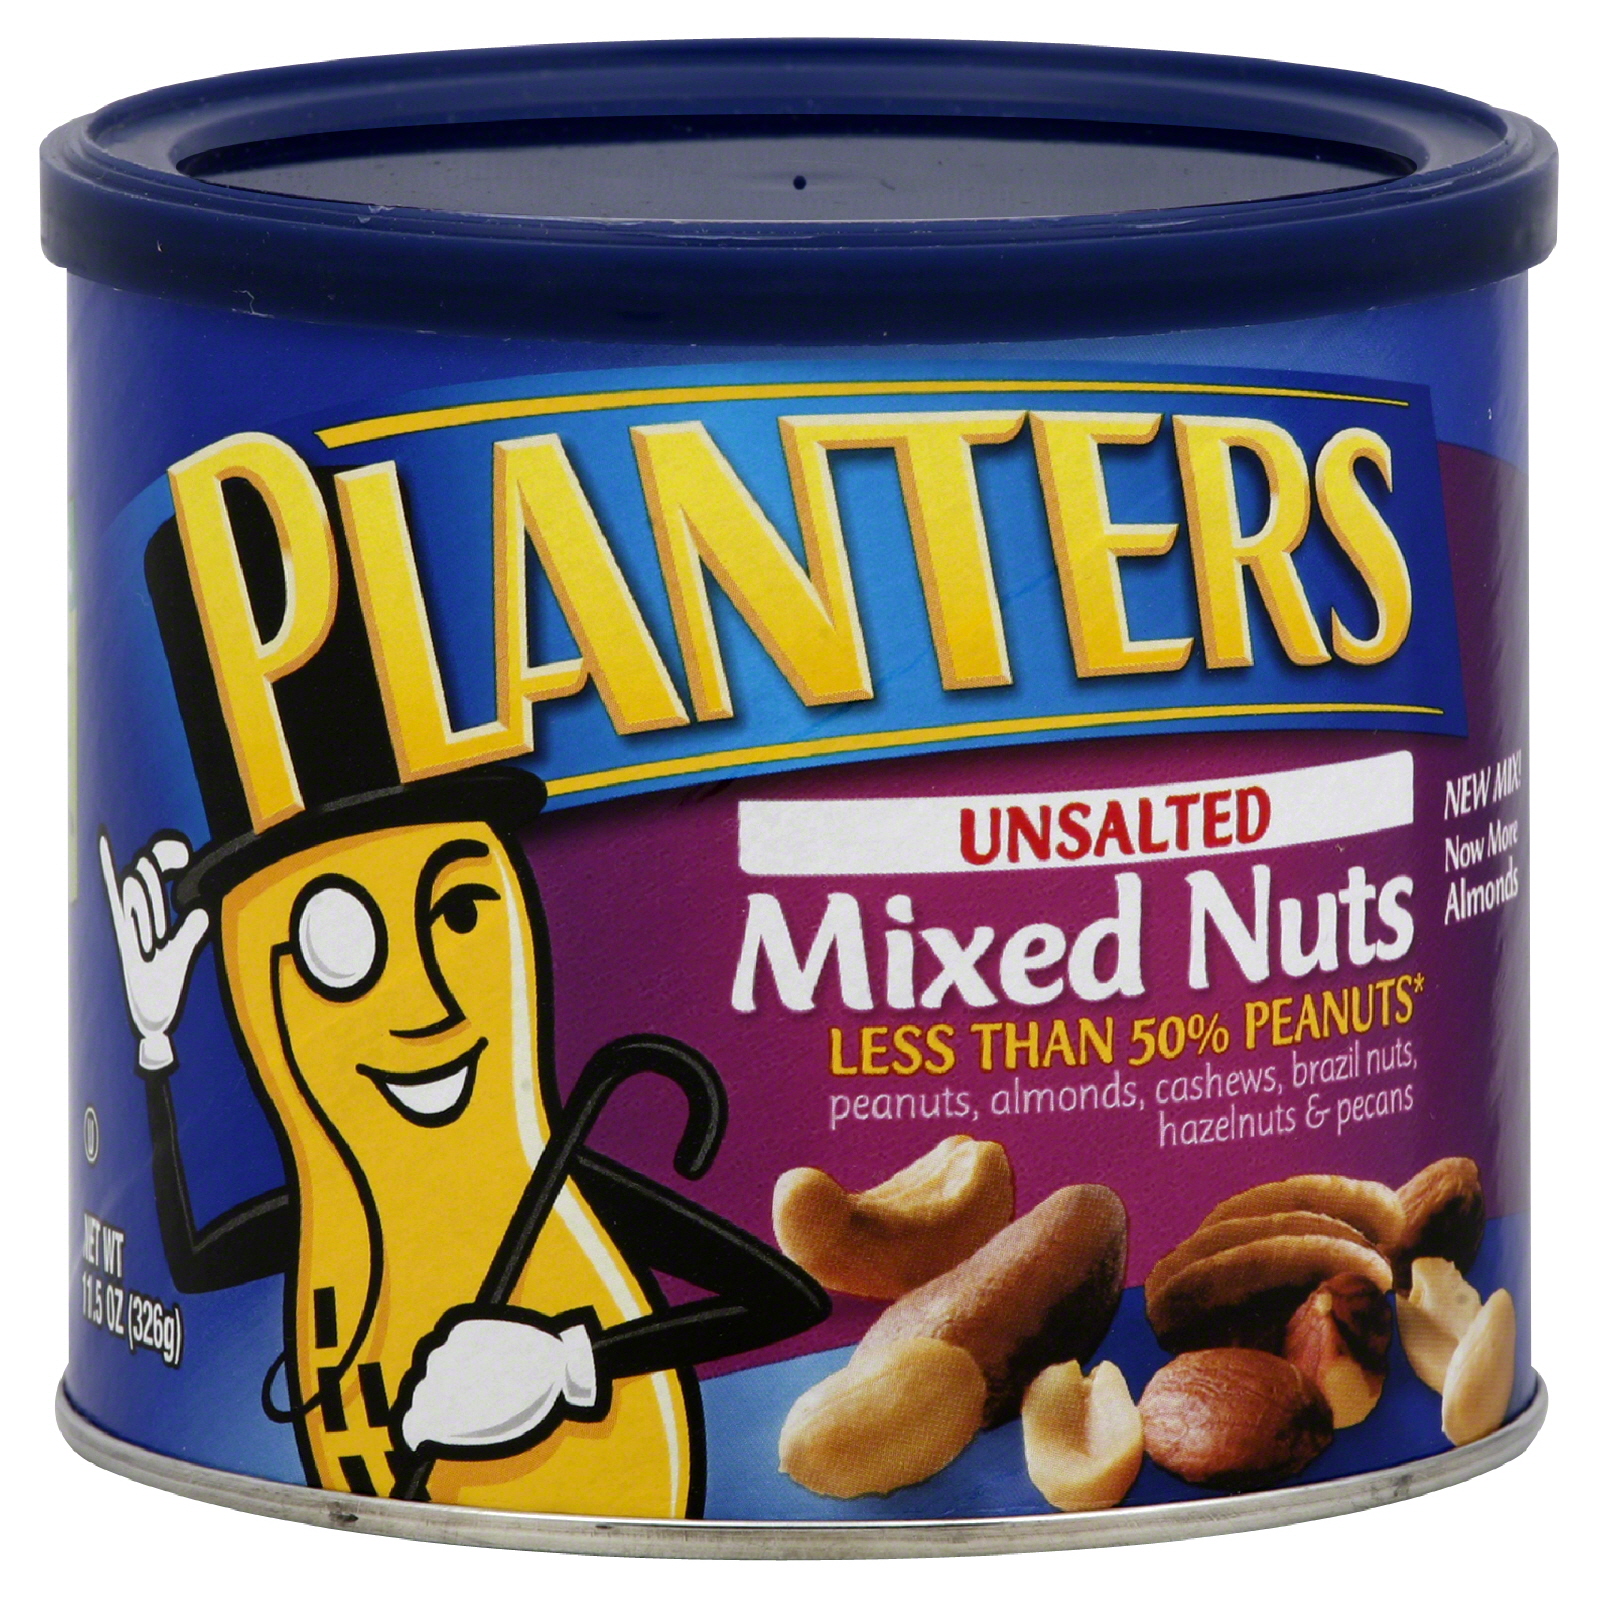 Planters Mixed Nuts, Unsalted, 11.5 oz (326 g)